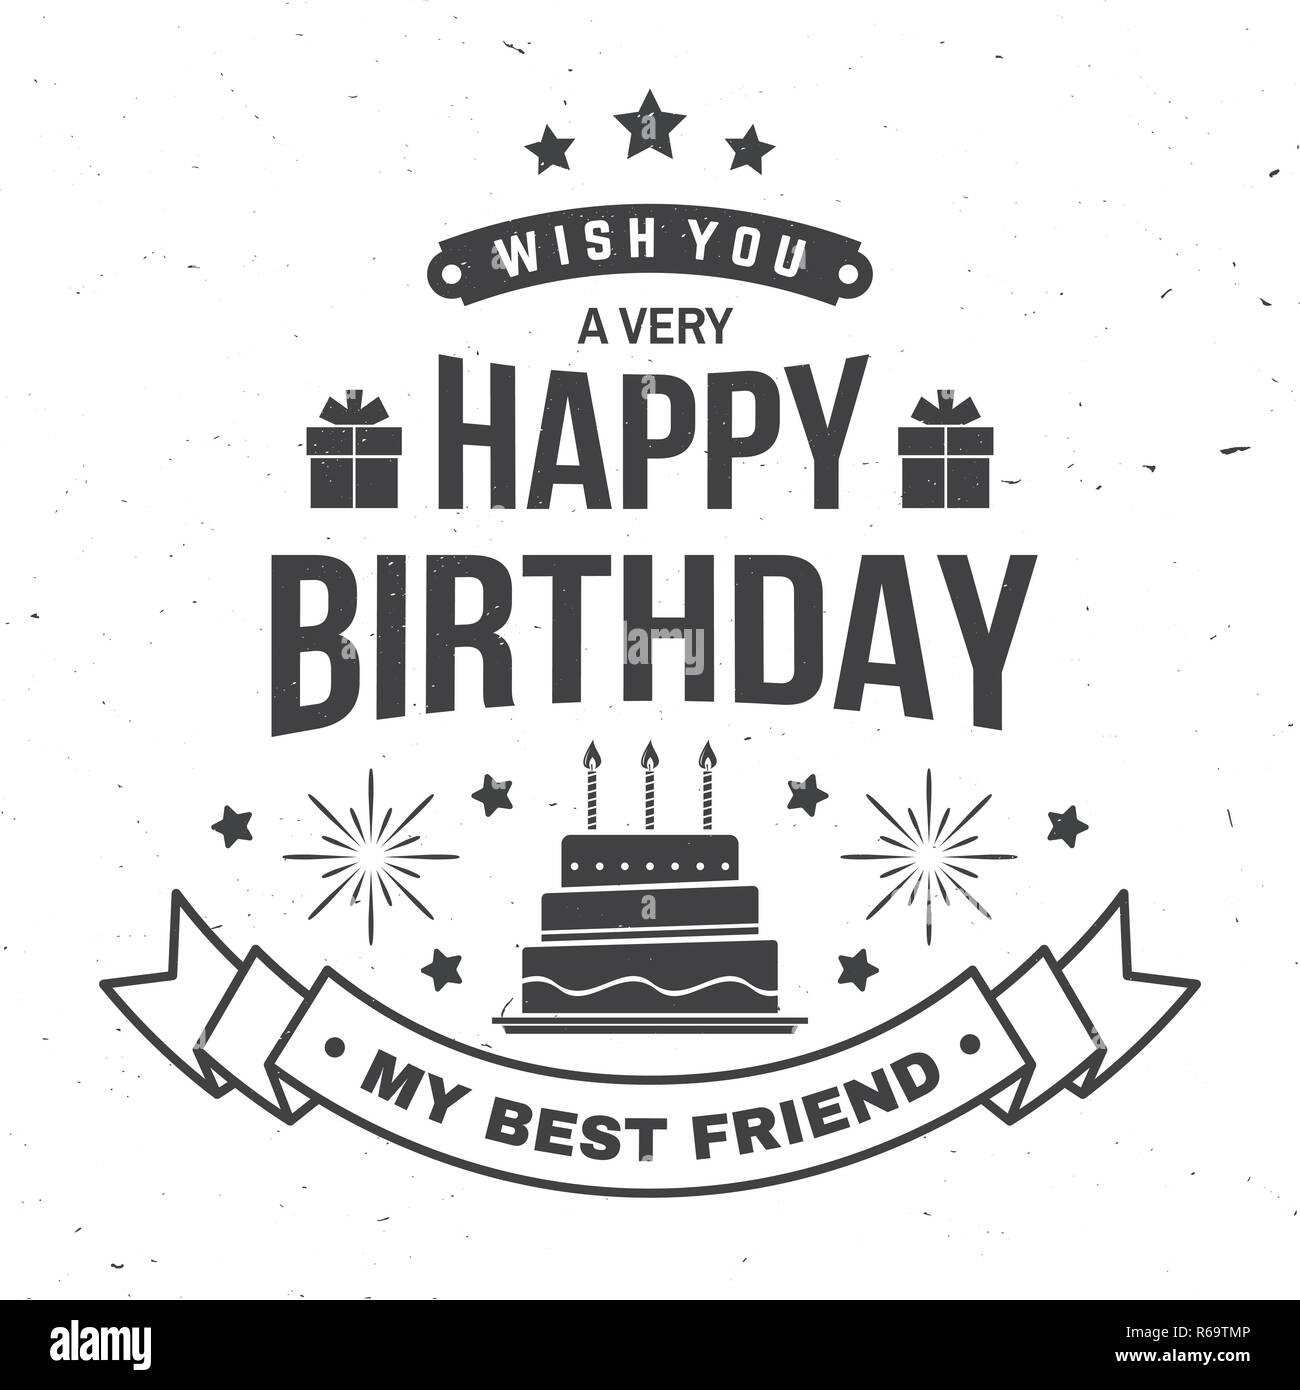 Wish you a very happy Birthday my best friend. Badge, sticker, card, with gifts and birthday cake with candles. Vector. Vintage typographic design for birthday celebration emblem in retro style Stock Vector